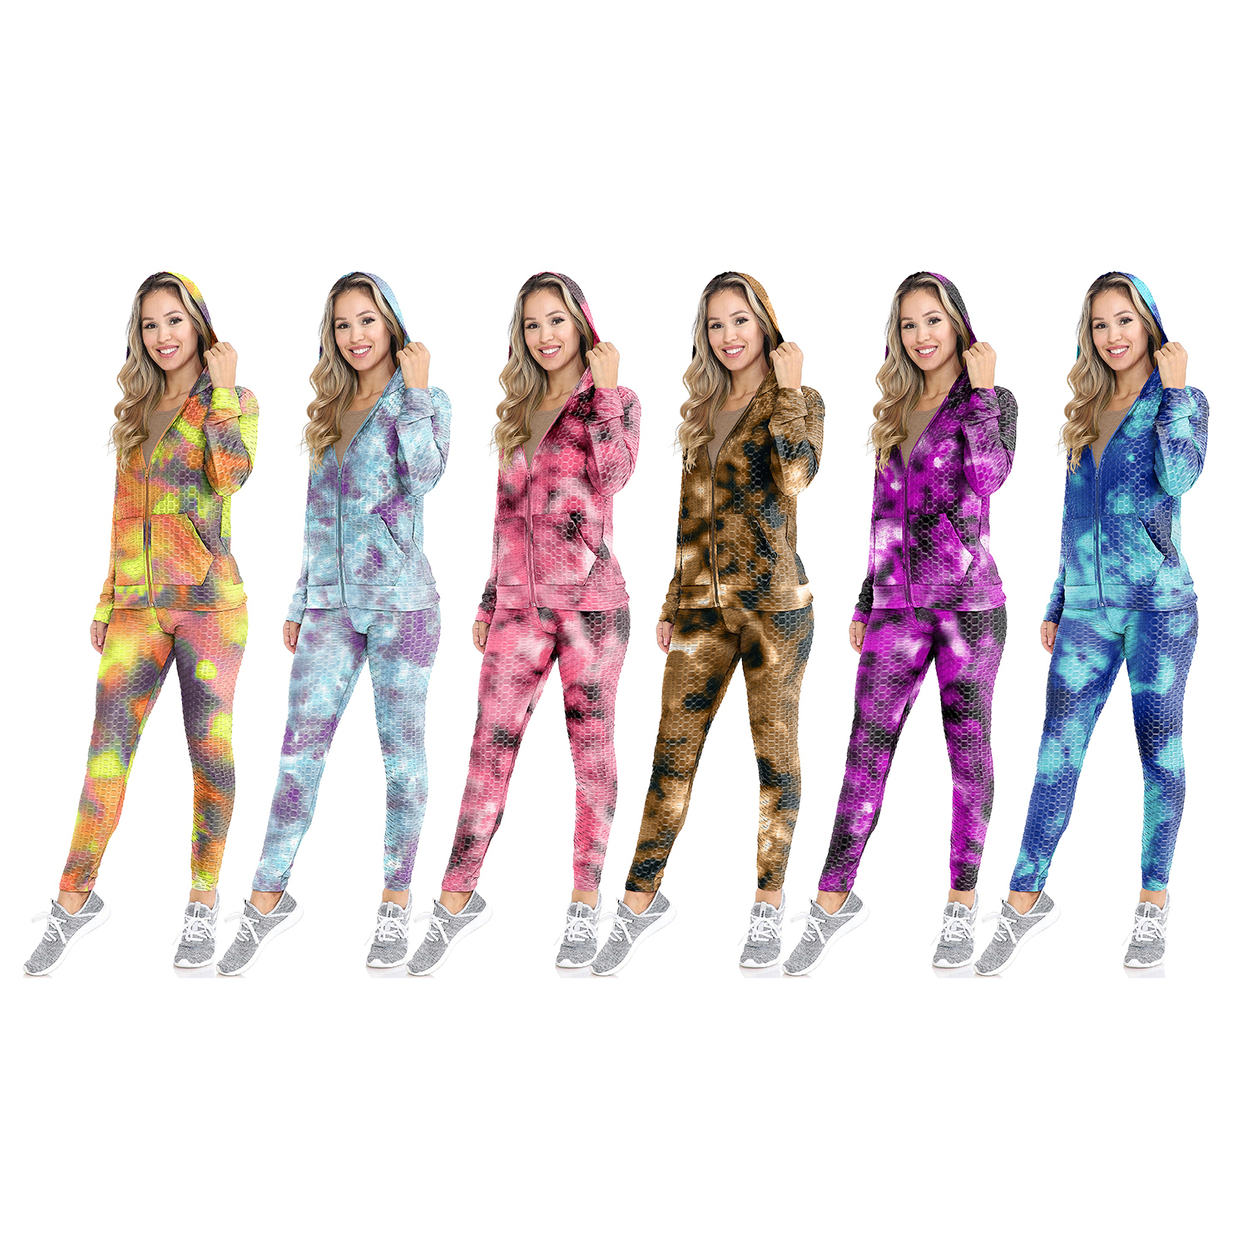 2-Piece: Women's Athletic Anti-Cellulite Textured Tie Dye Body Contour Yoga Track Suit W/ Hood - Small, Solid